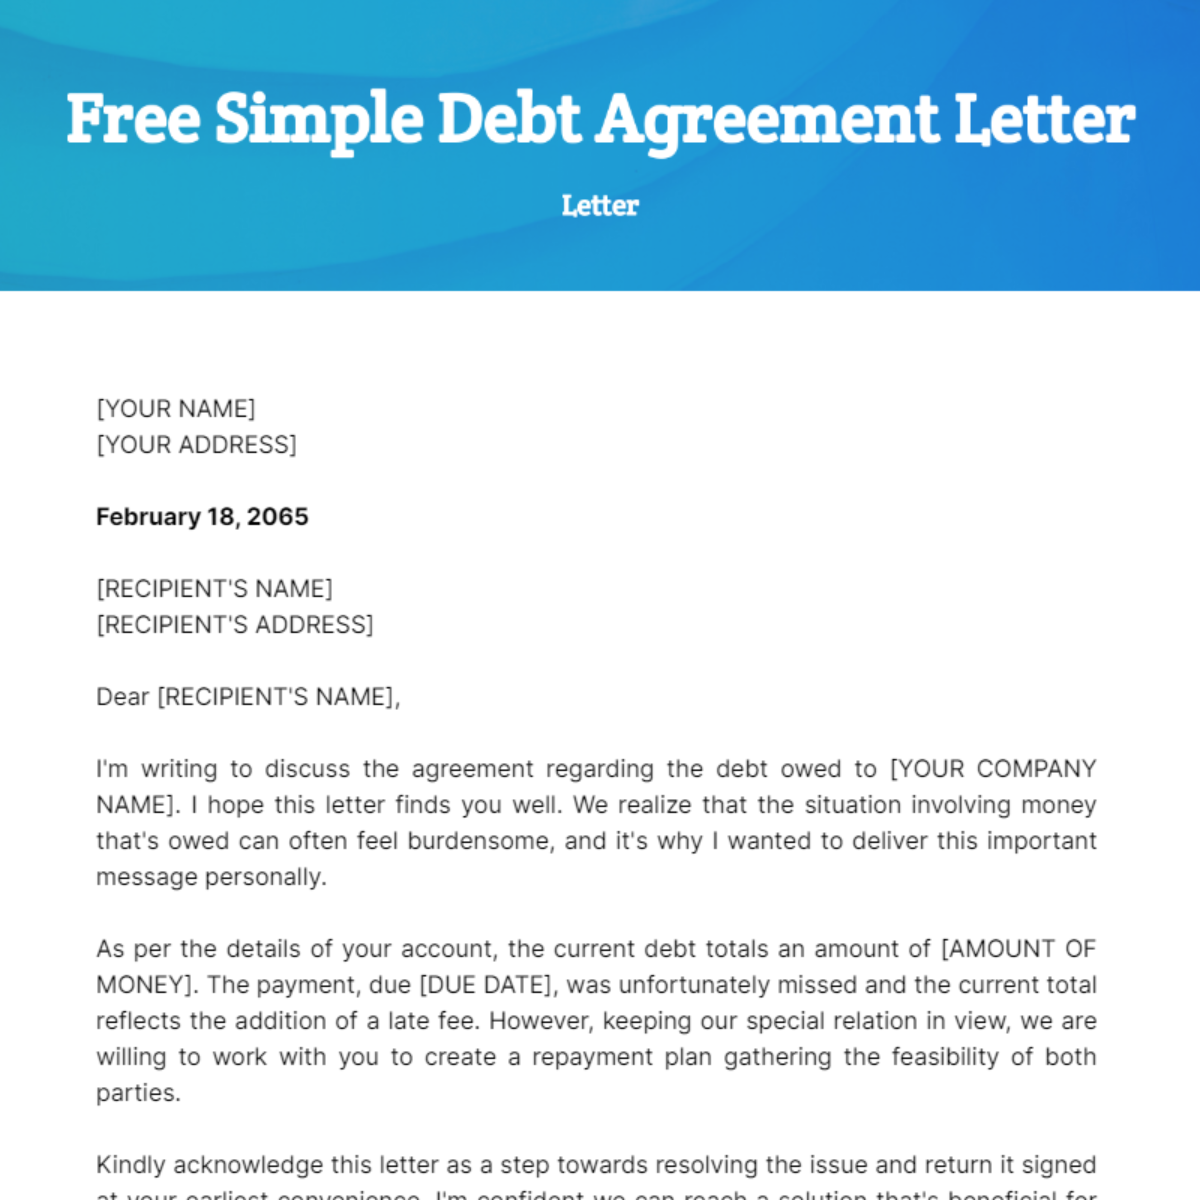 Simple Debt Agreement Letter Template